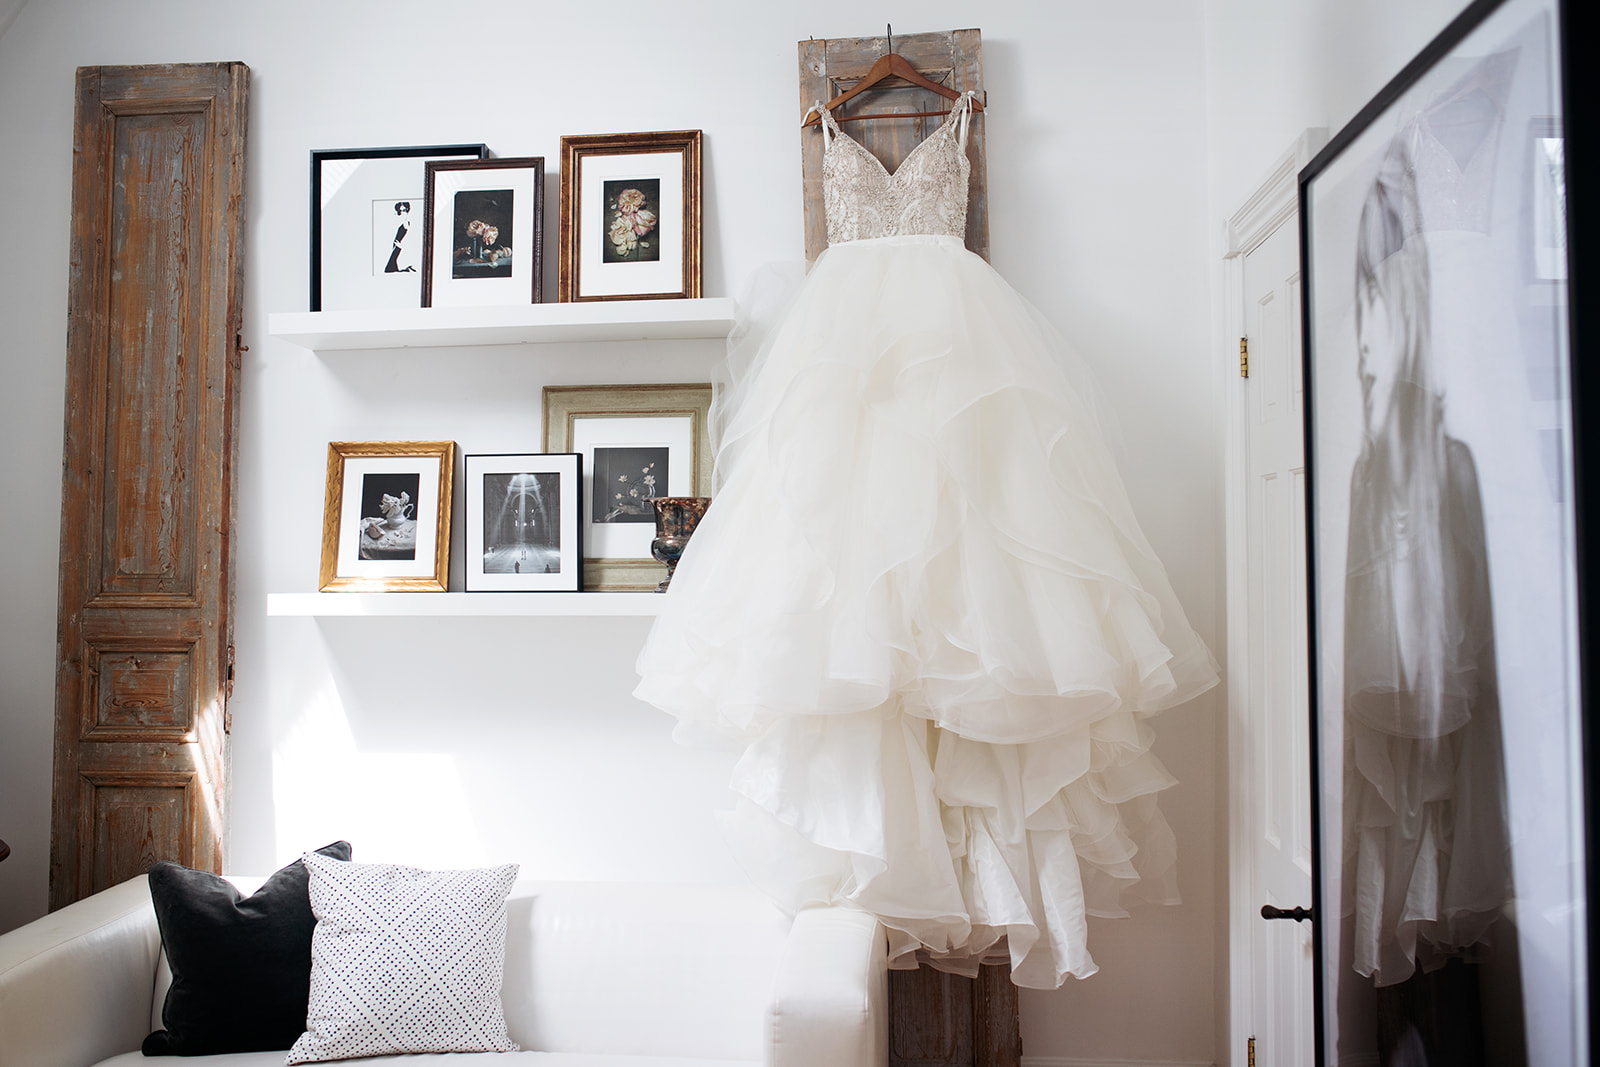 Top 5 Tips for Brides-to-Be